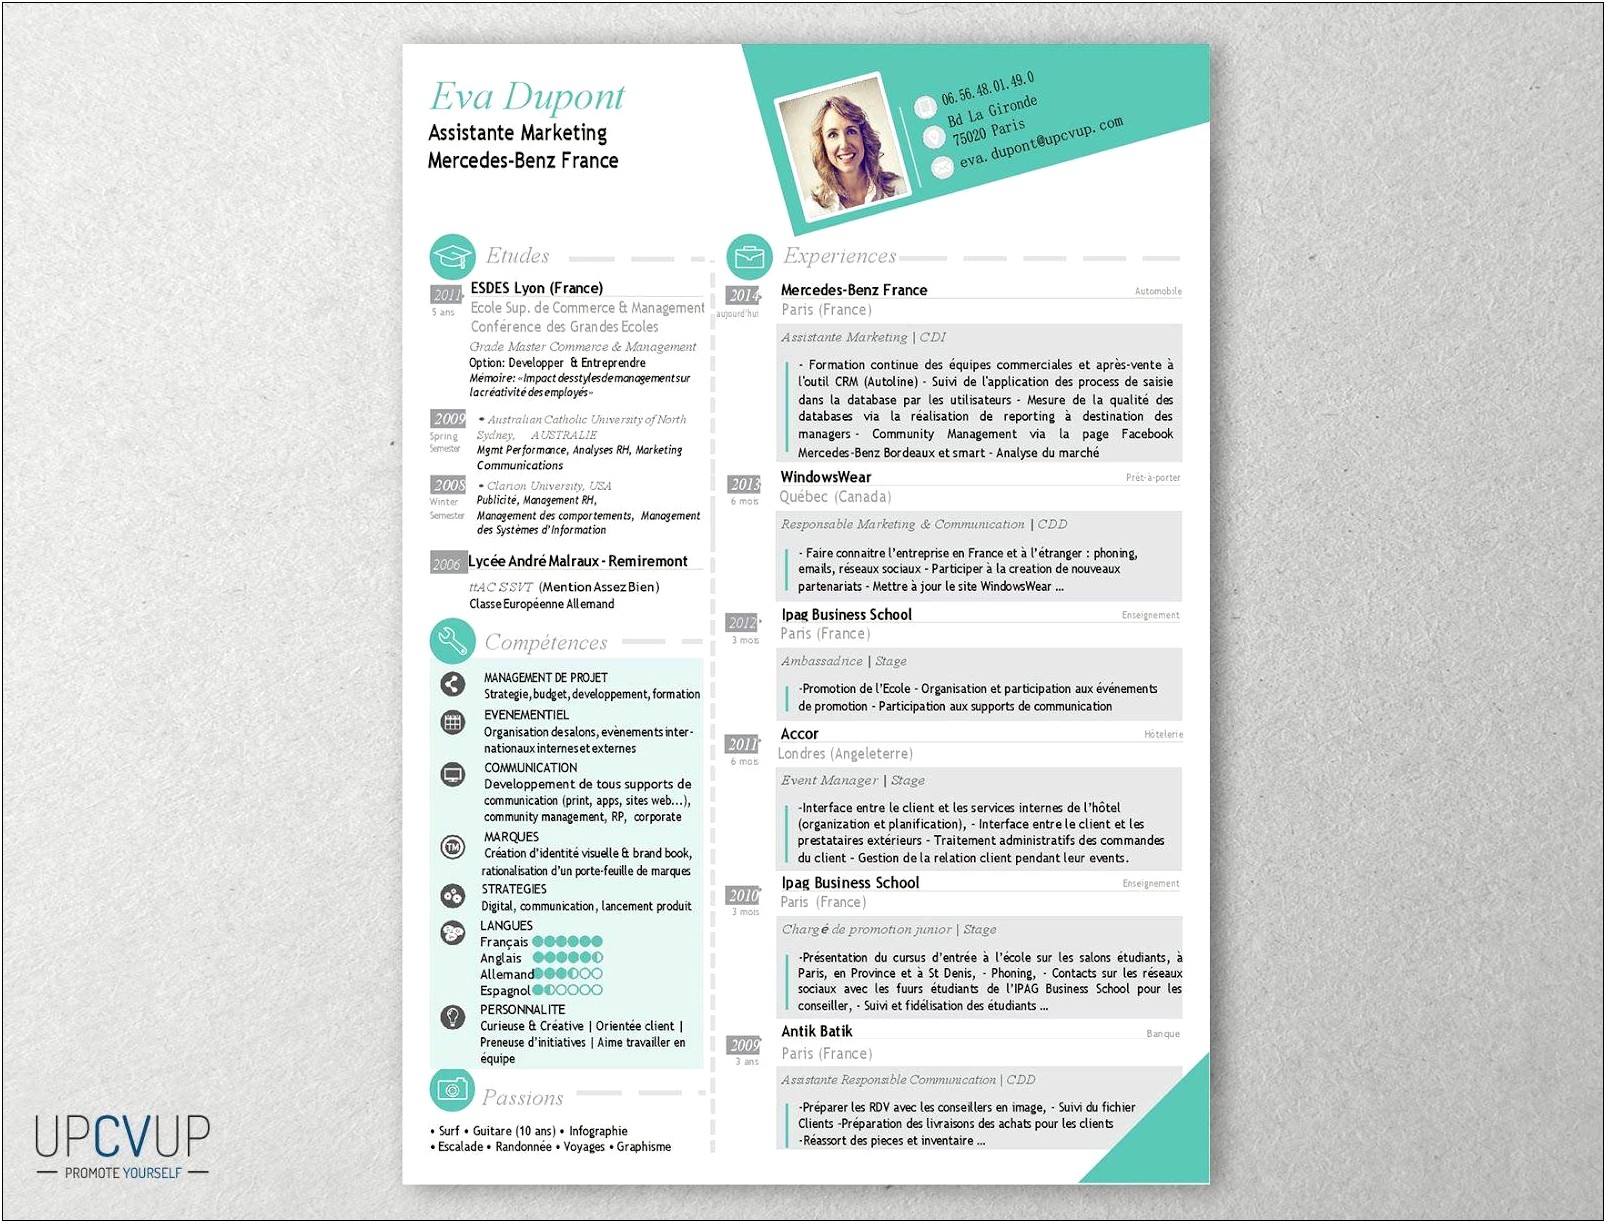 Best Marketing Resumes Examples 2019